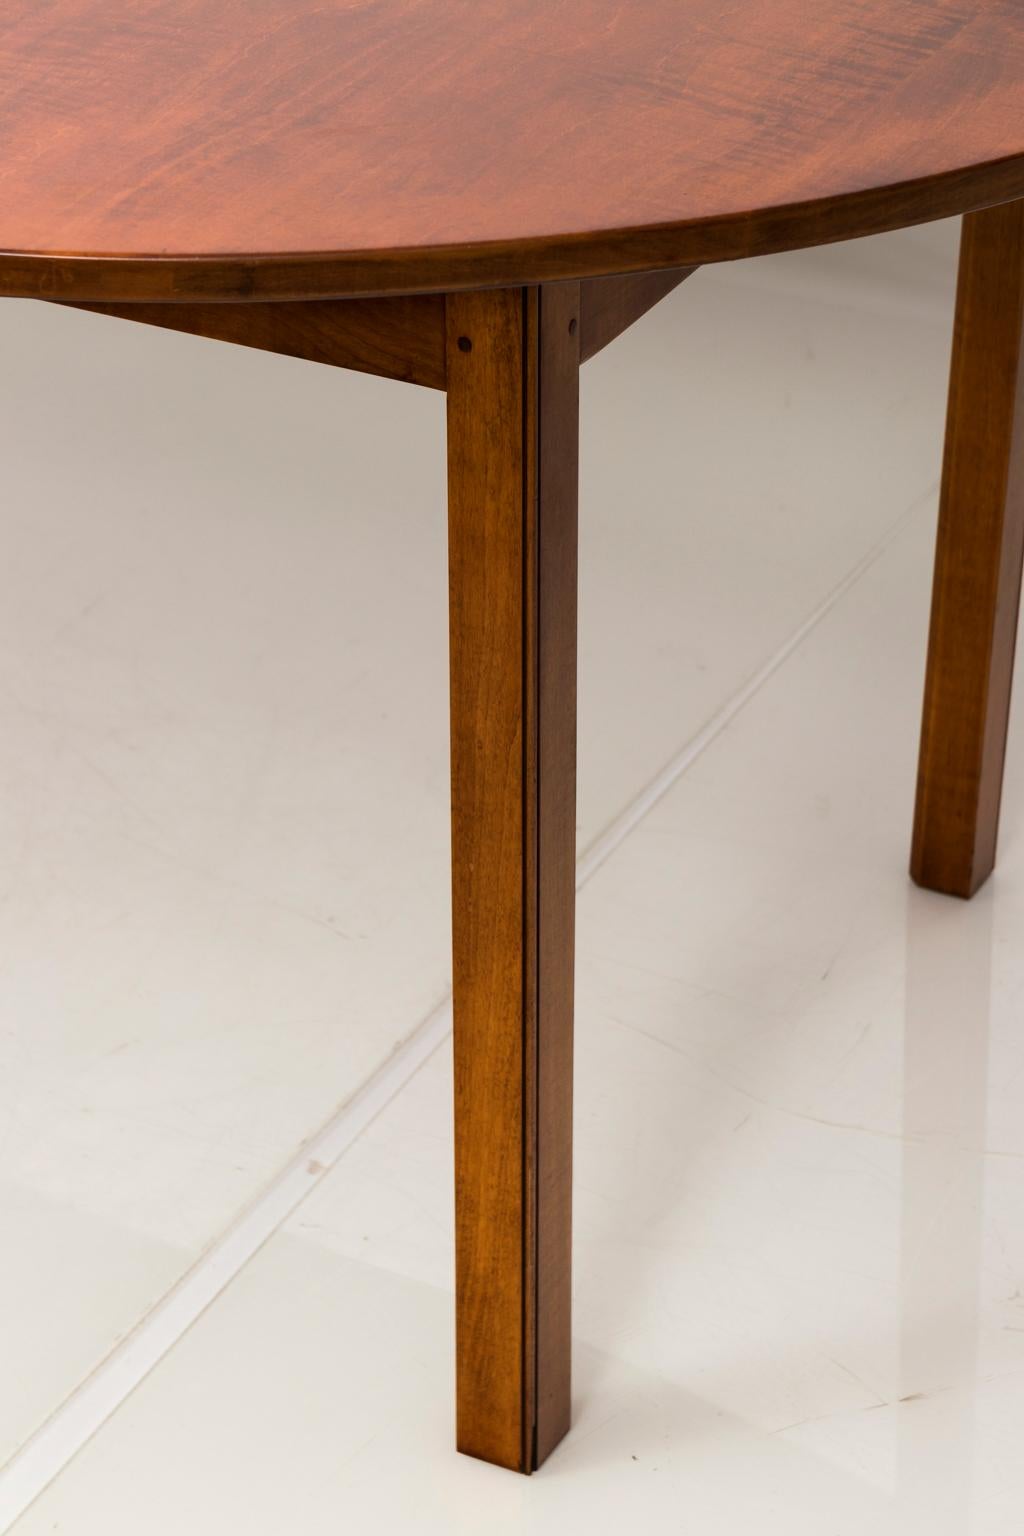 Tiger Maple Dining Room Table by David Lefort, circa 2000 1